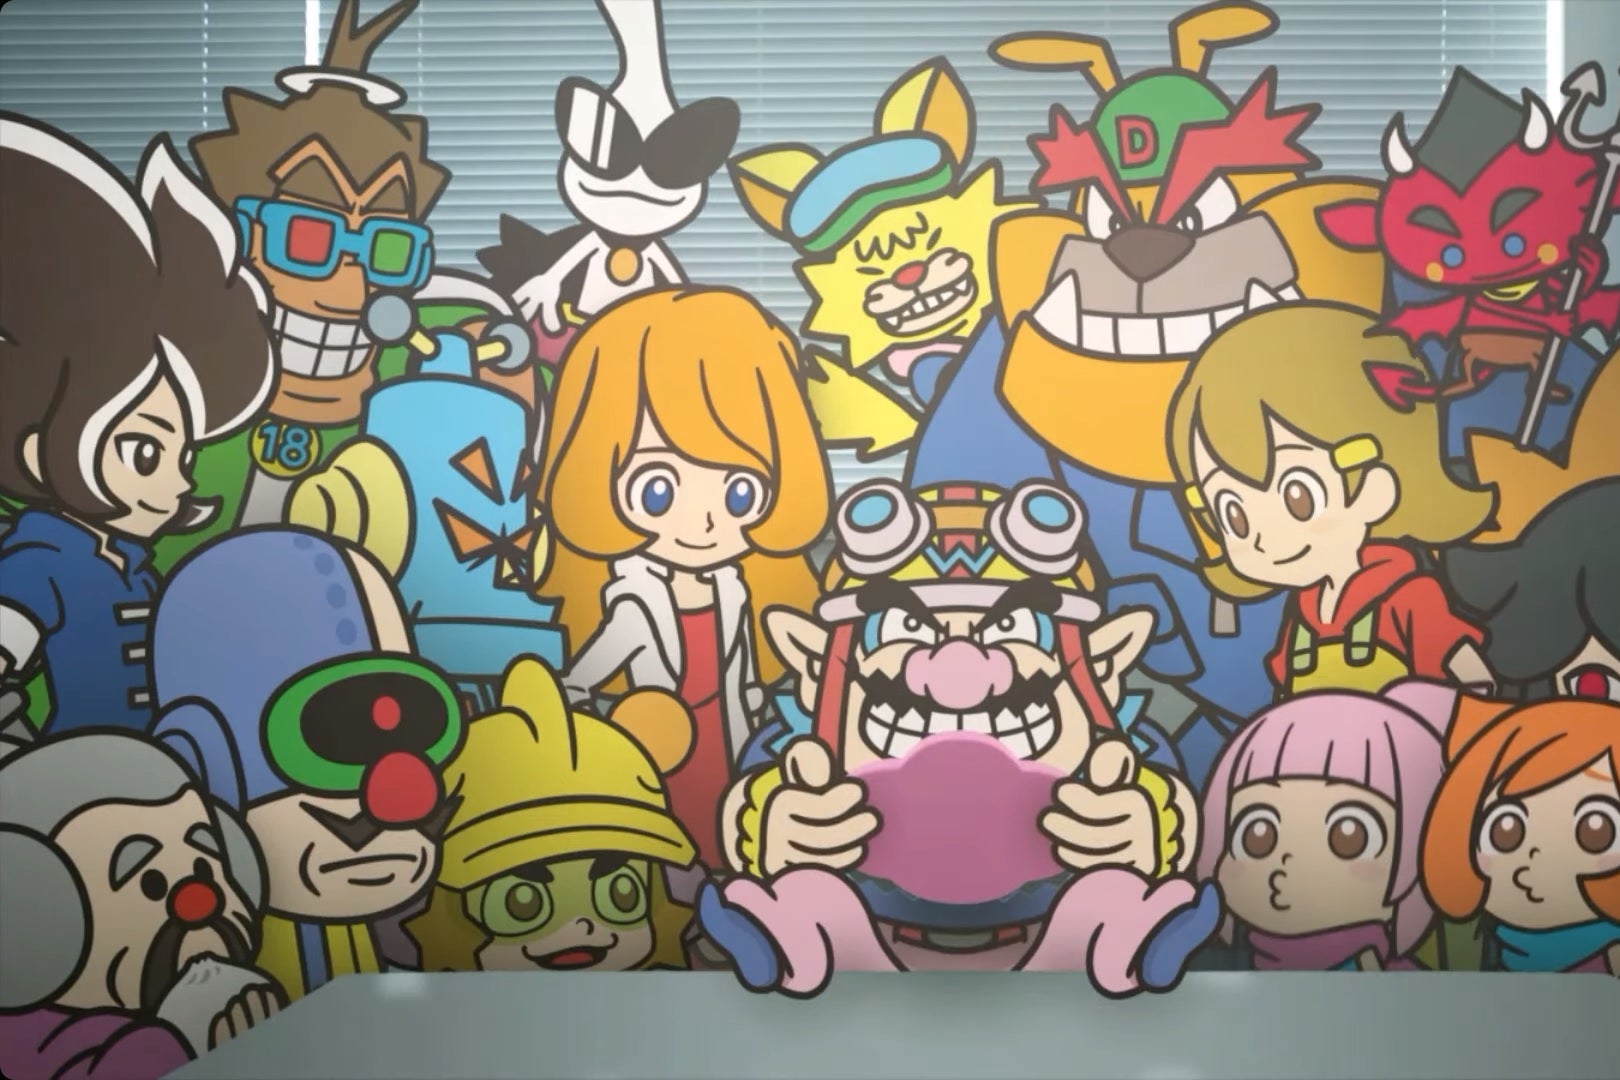 Multiple brightly colored characters with large eyes look at a man with a large pointy black mustache in the center. He holds a pink handheld game console and looks down at the screen, his purple shoes and pink pants propped upon a table in front of the group.